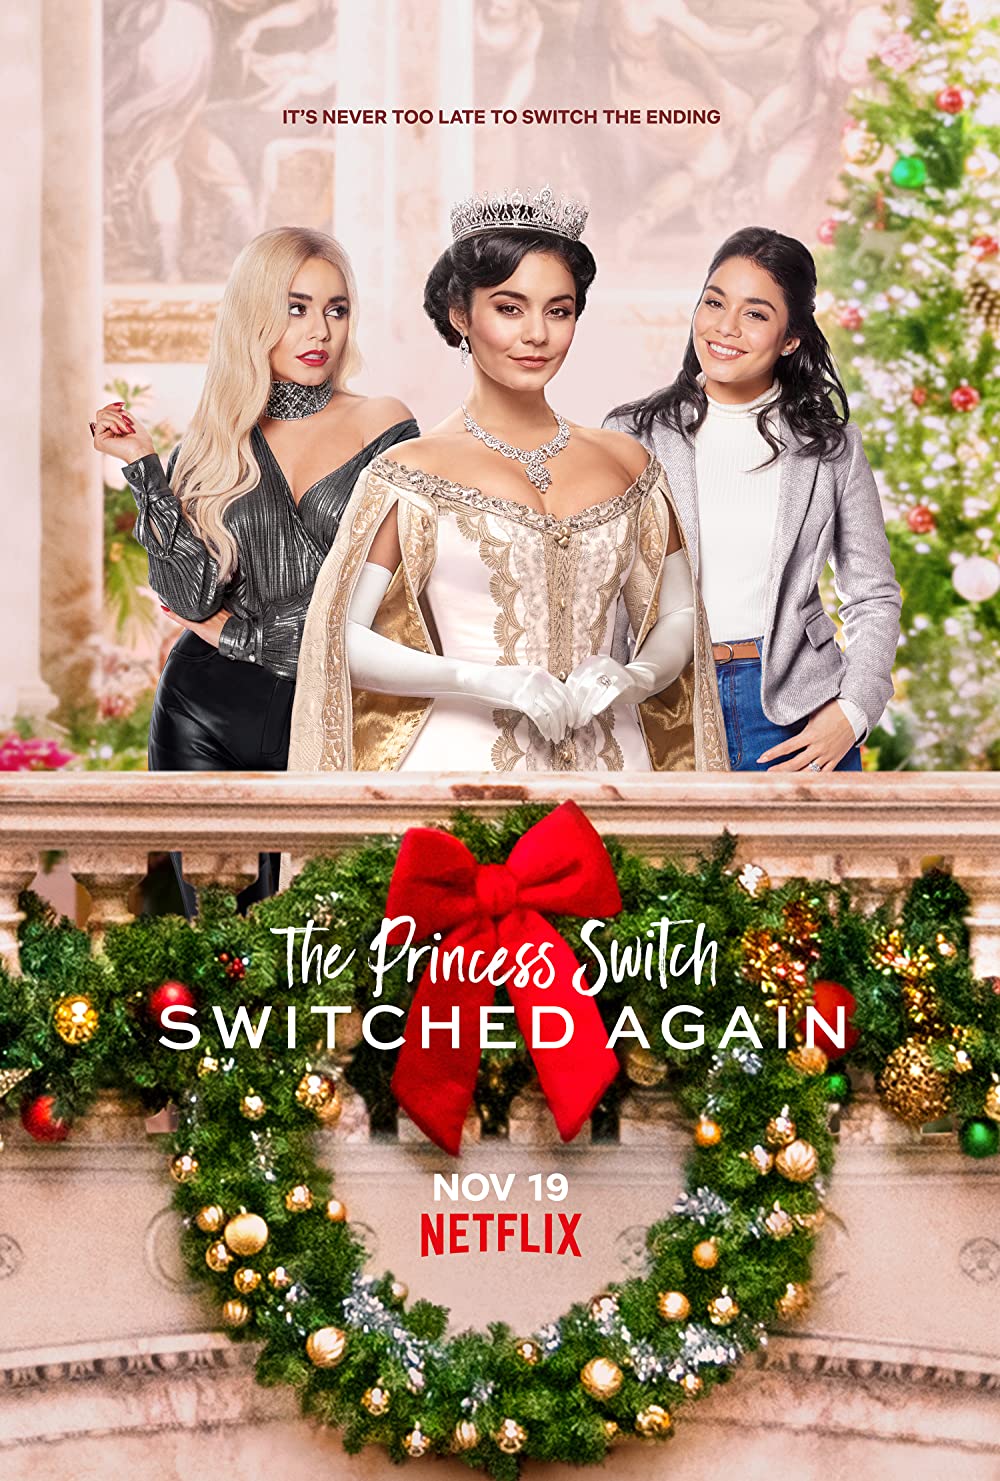 Poster for The Princess Switch Netflix series